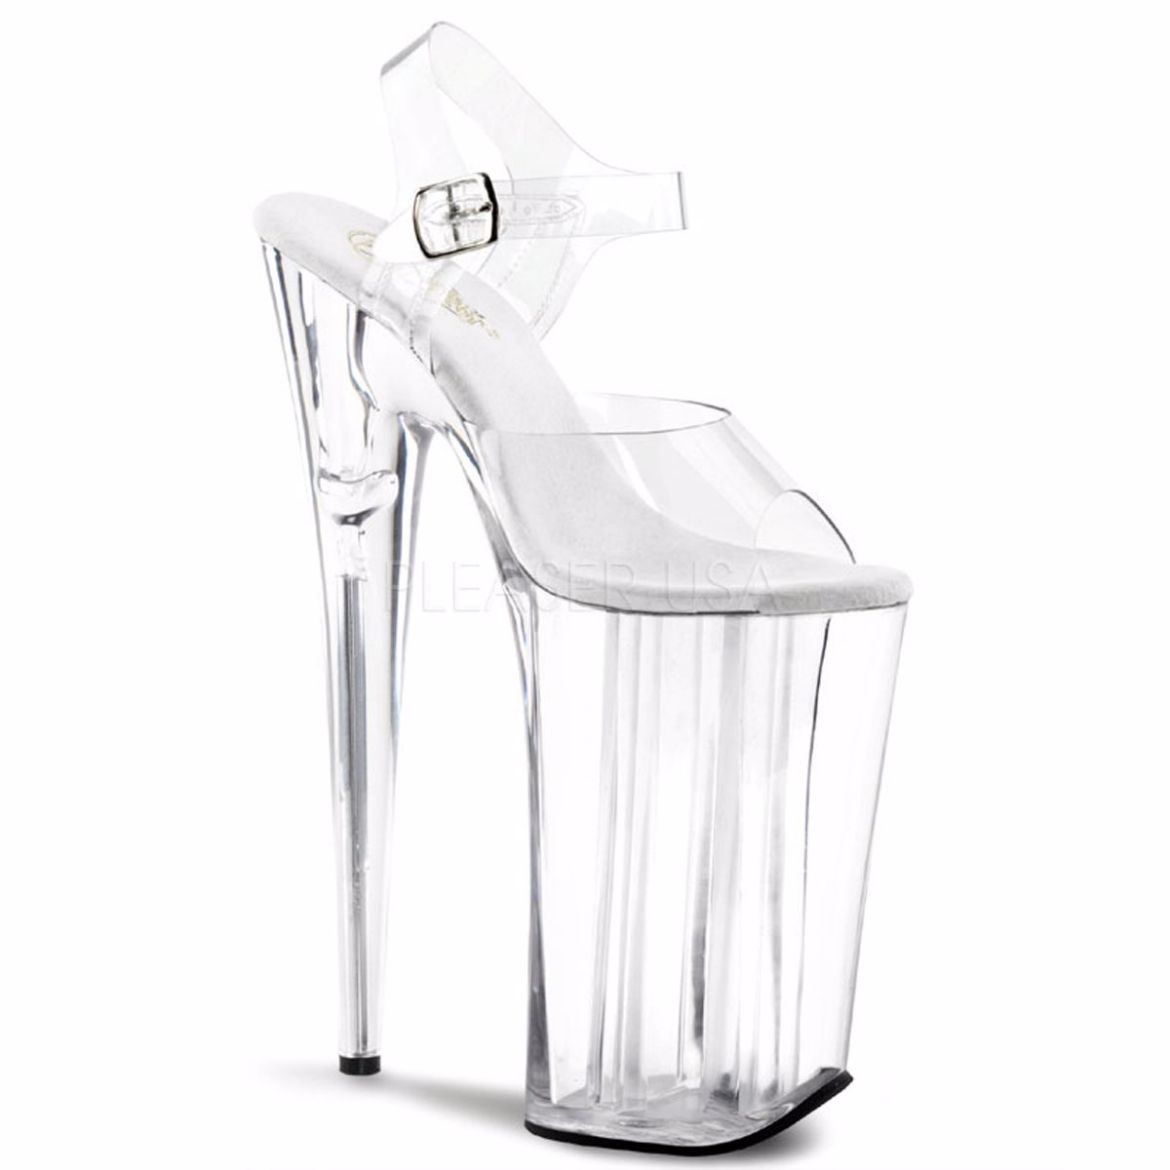 Product image of Pleaser Beyond-008 Clear/Clear, 10 inch (25.4 cm) Heel, 6 1/4 inch (15.9 cm) Platform Sandal Shoes